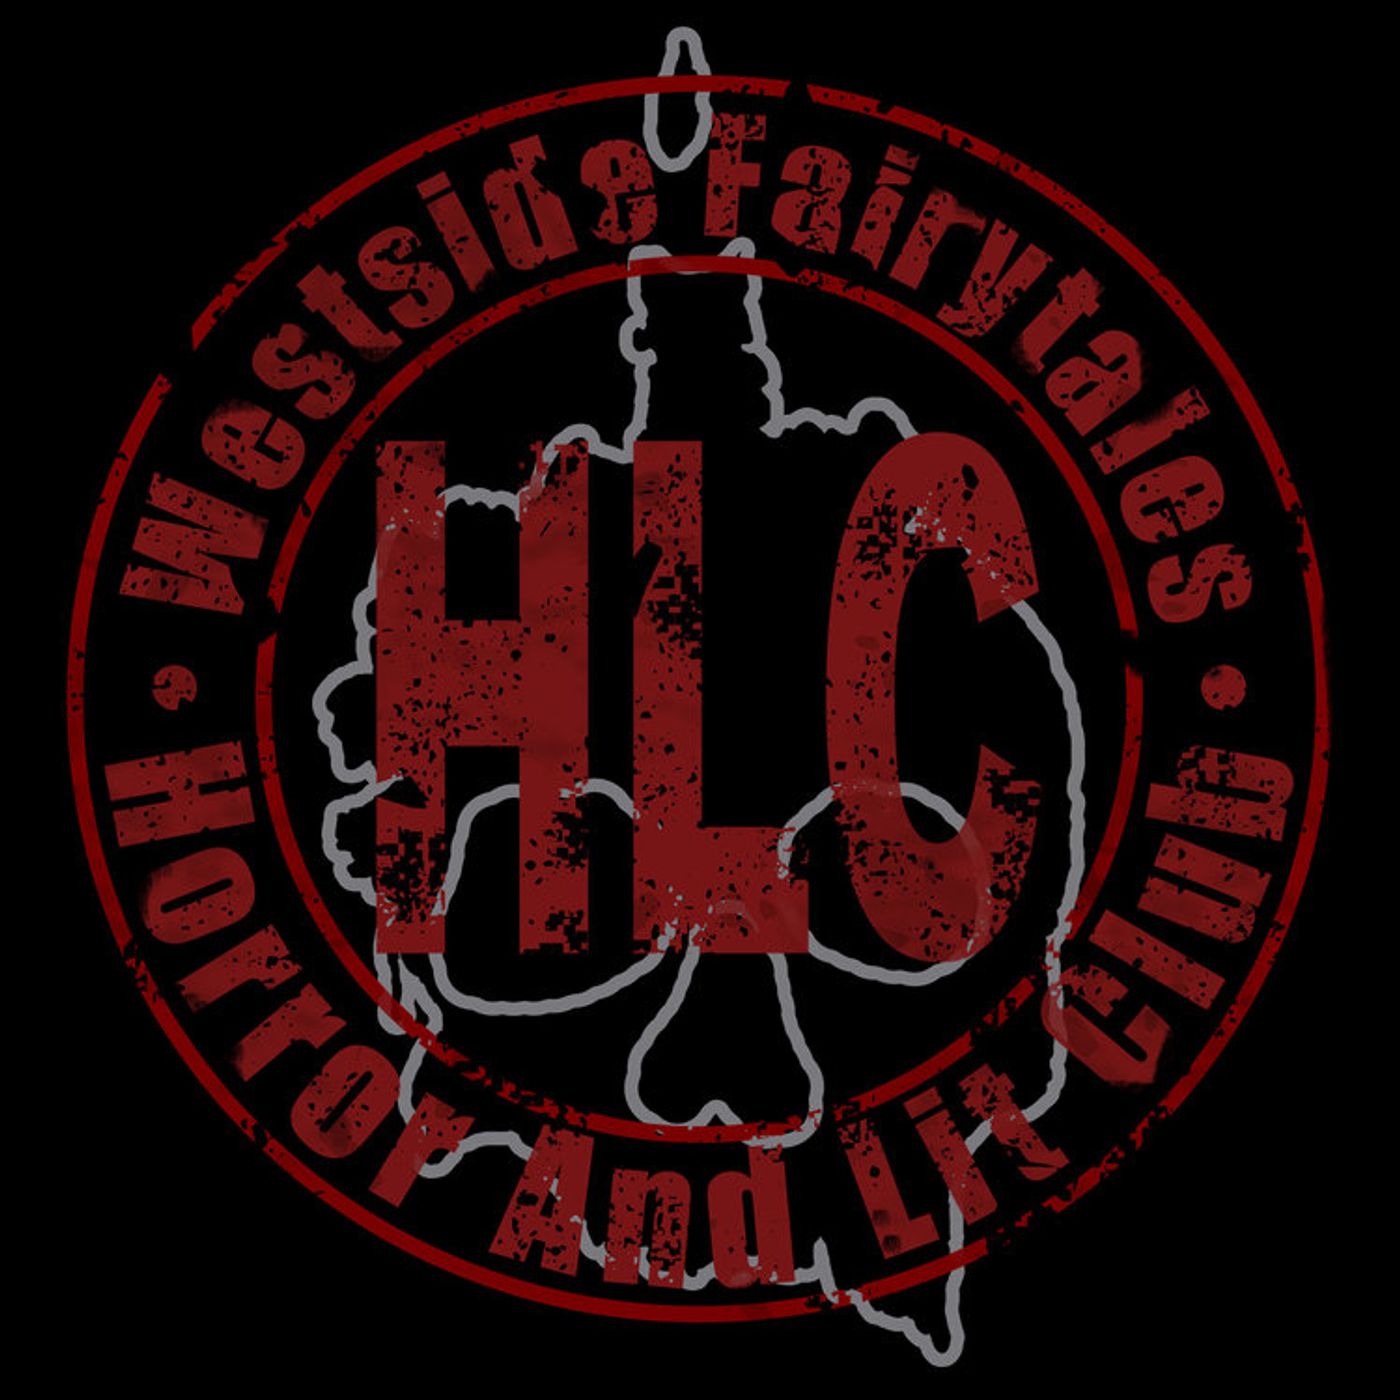 HLC - ”Barbarian”